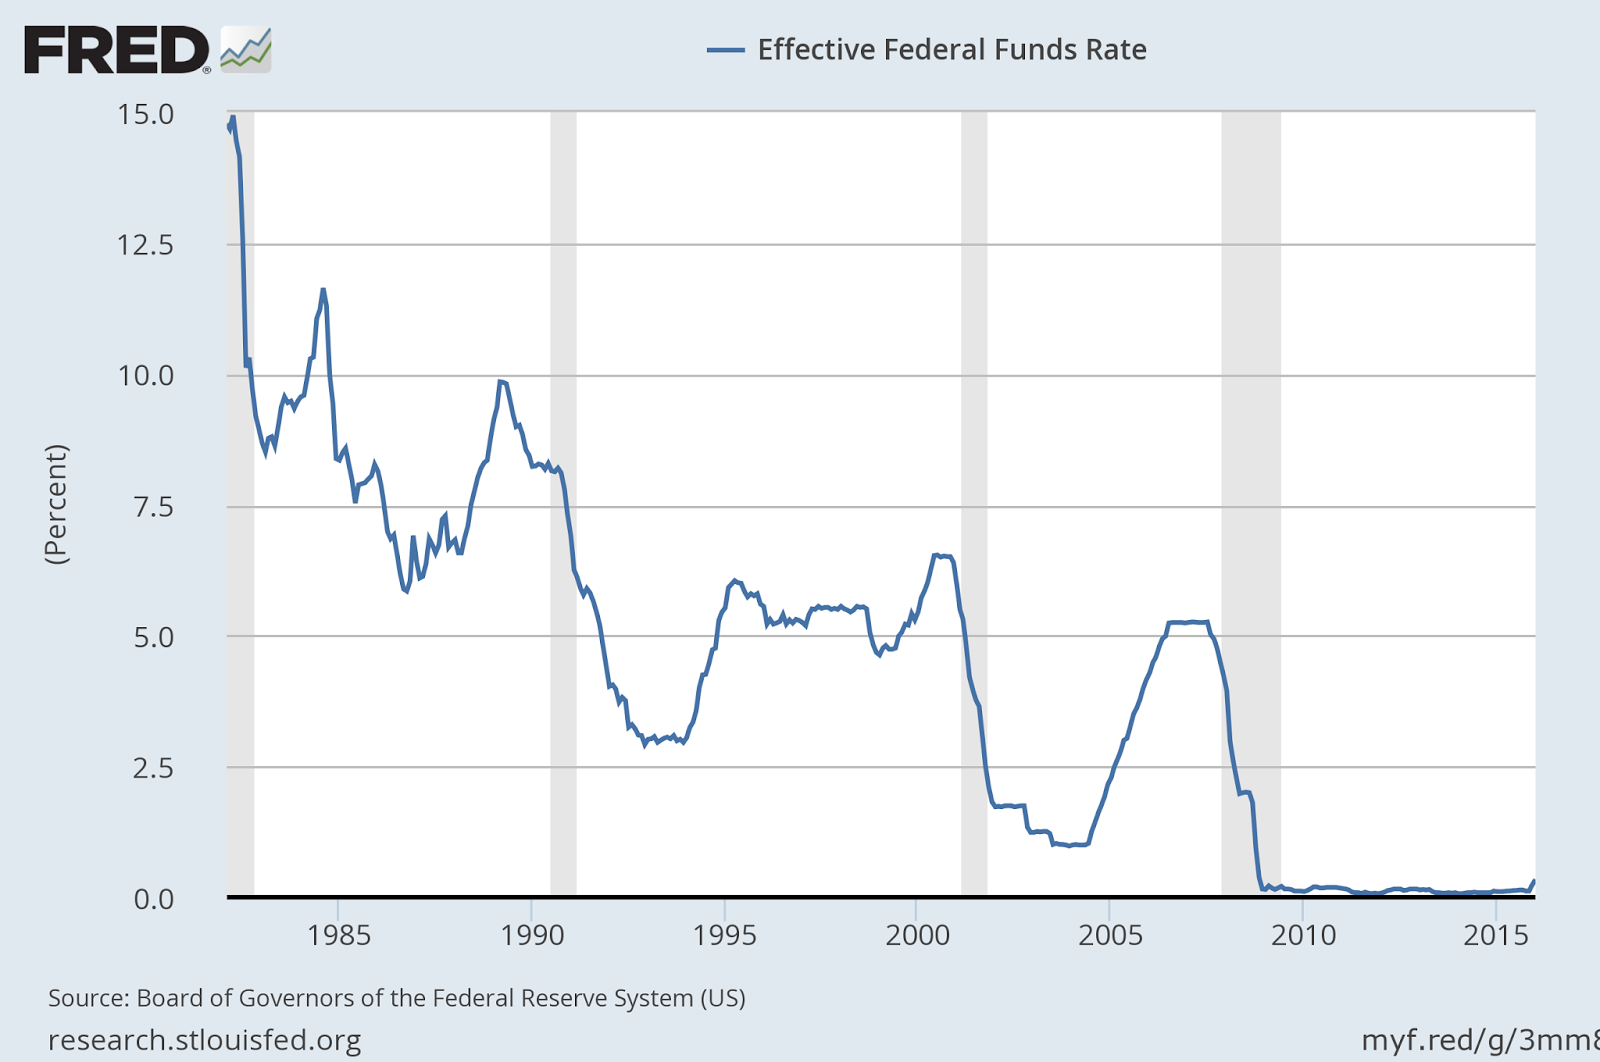 Real Fed Funds Rate Chart